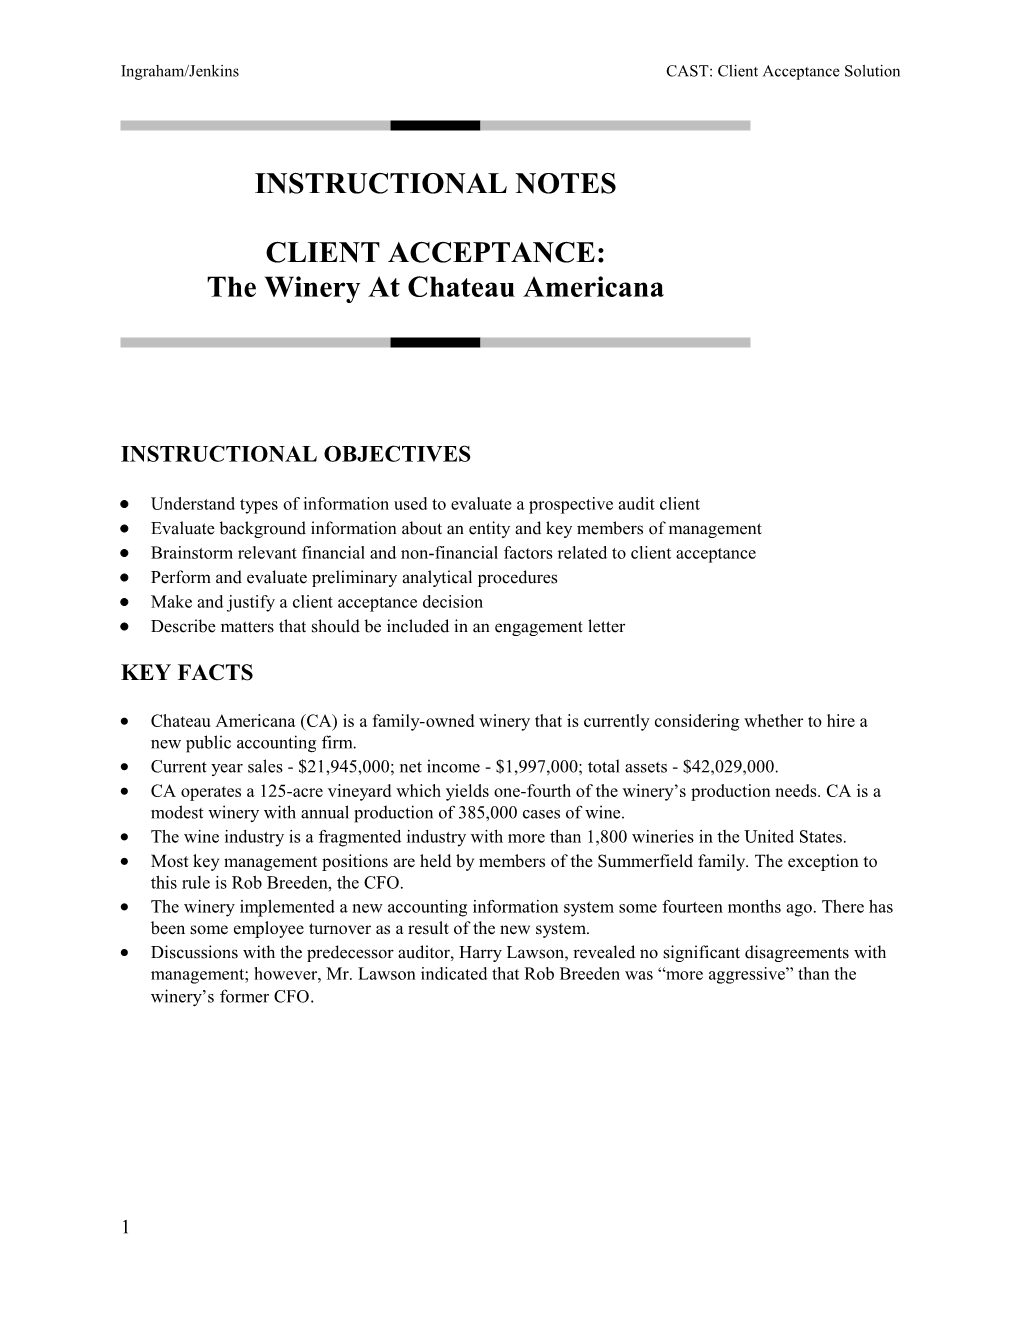 Instructional Notes and Solution